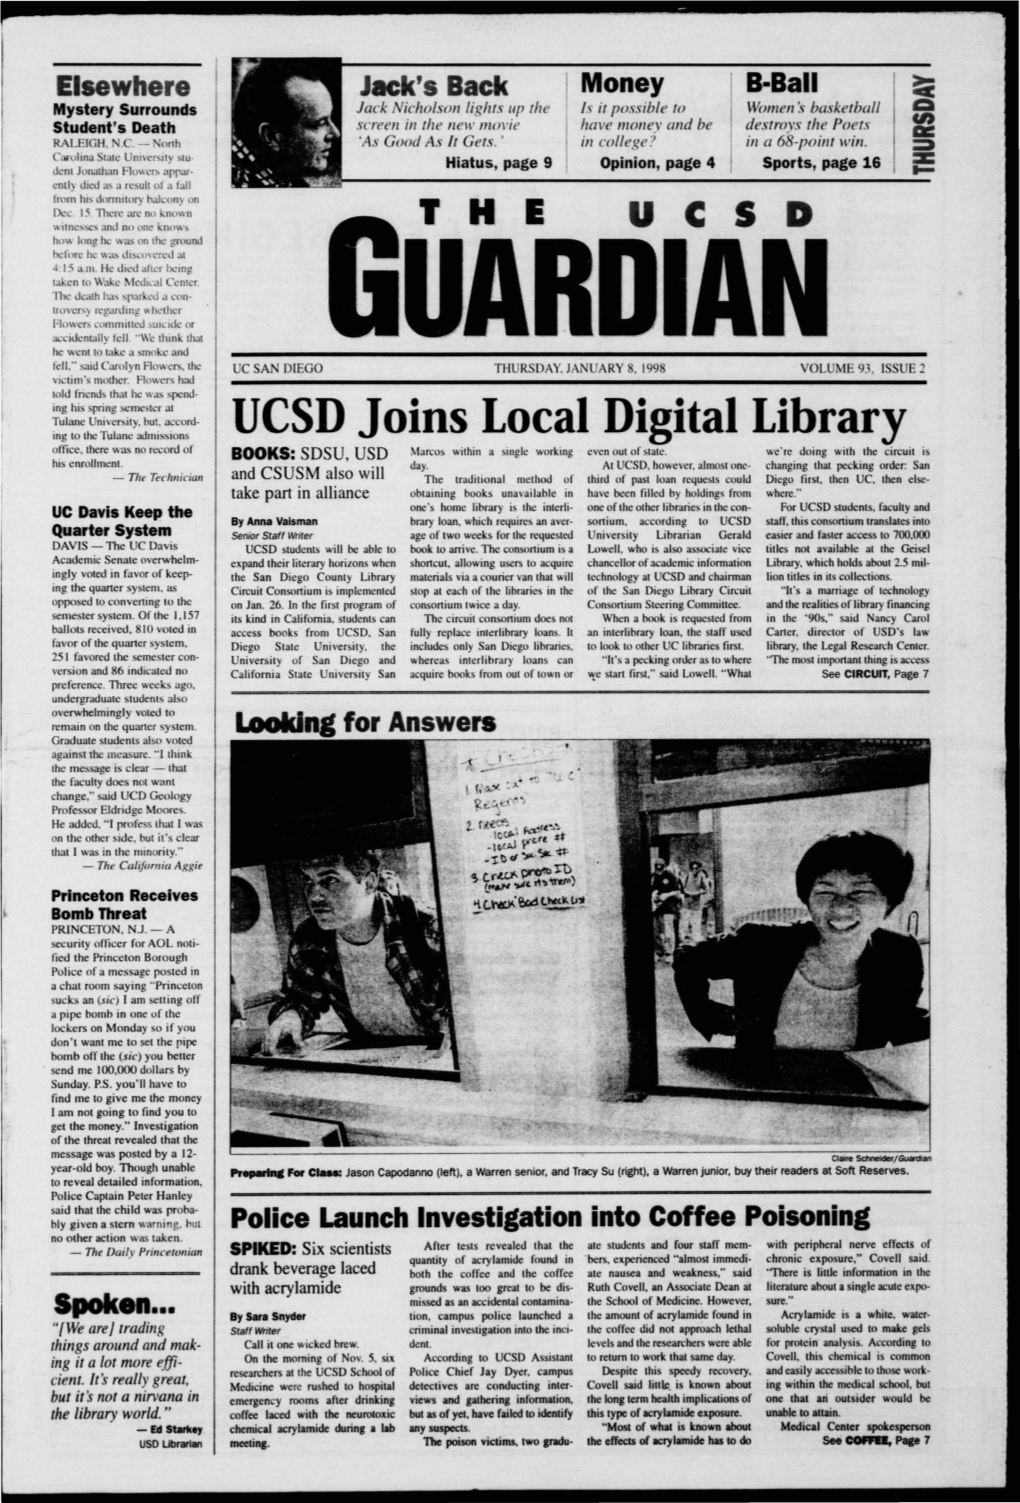 UCSD Joins Local Digital Library Office, There Was No Record of BOOKS:SDSU,USD Marcos Within a Single Working Even out of State